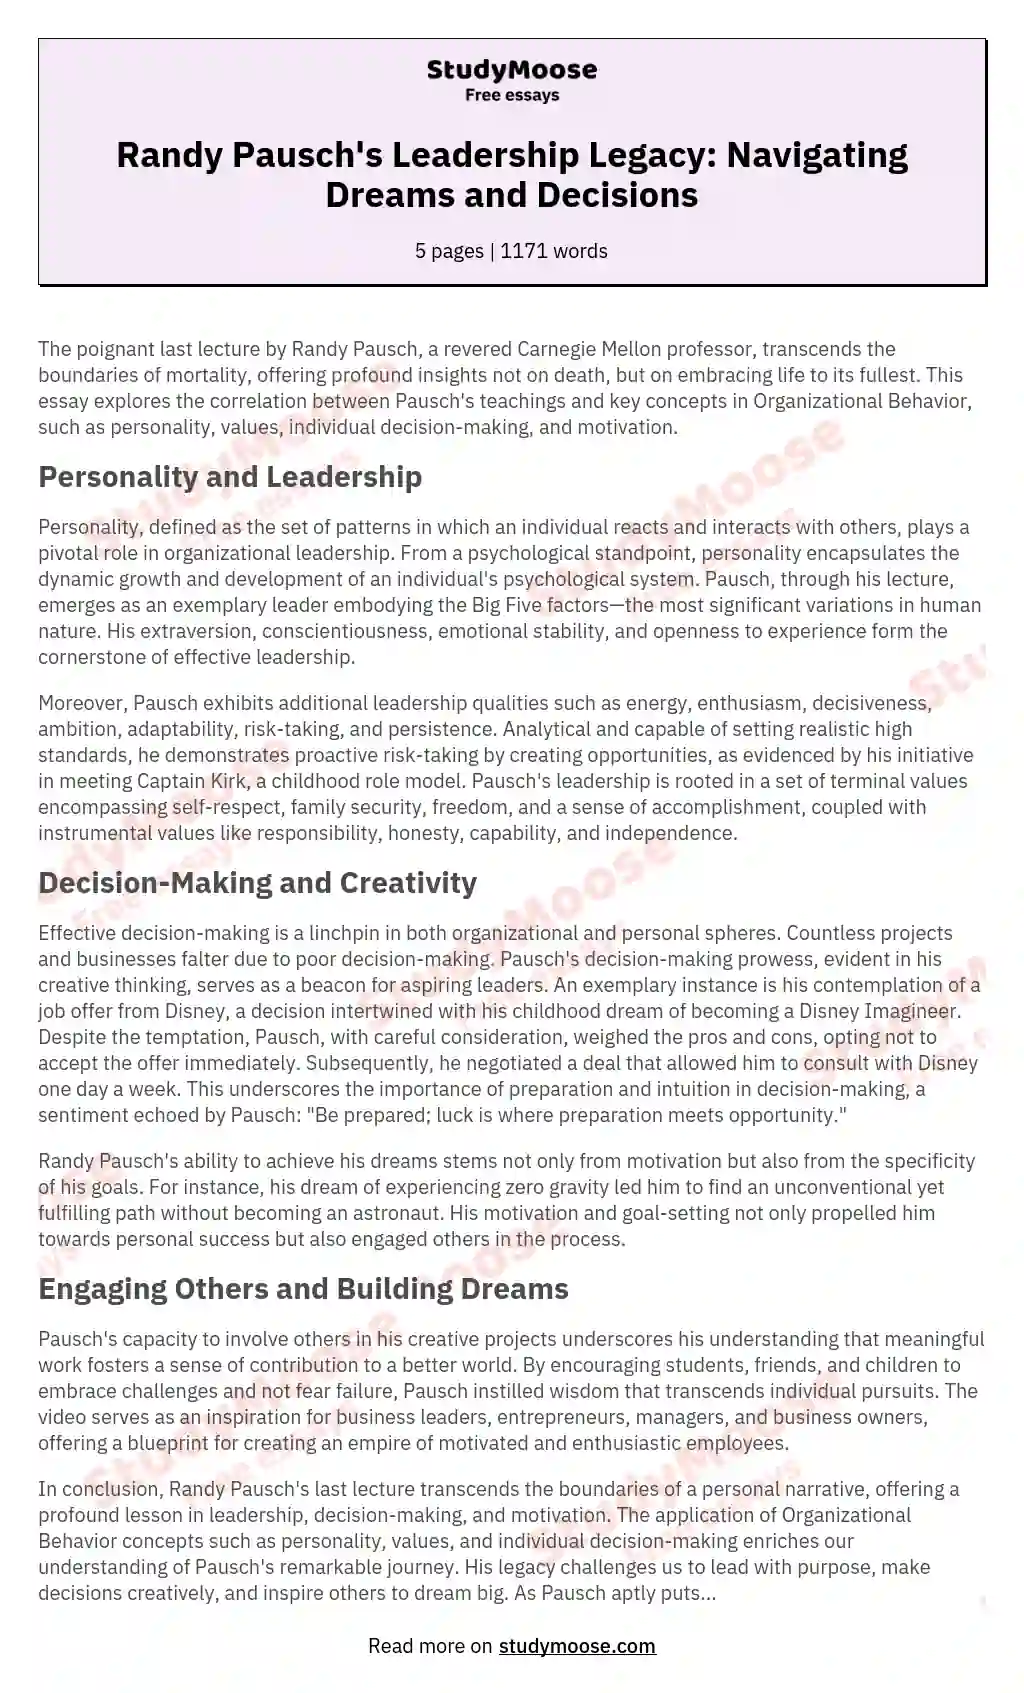 Randy Pausch's Leadership Legacy: Navigating Dreams and Decisions essay